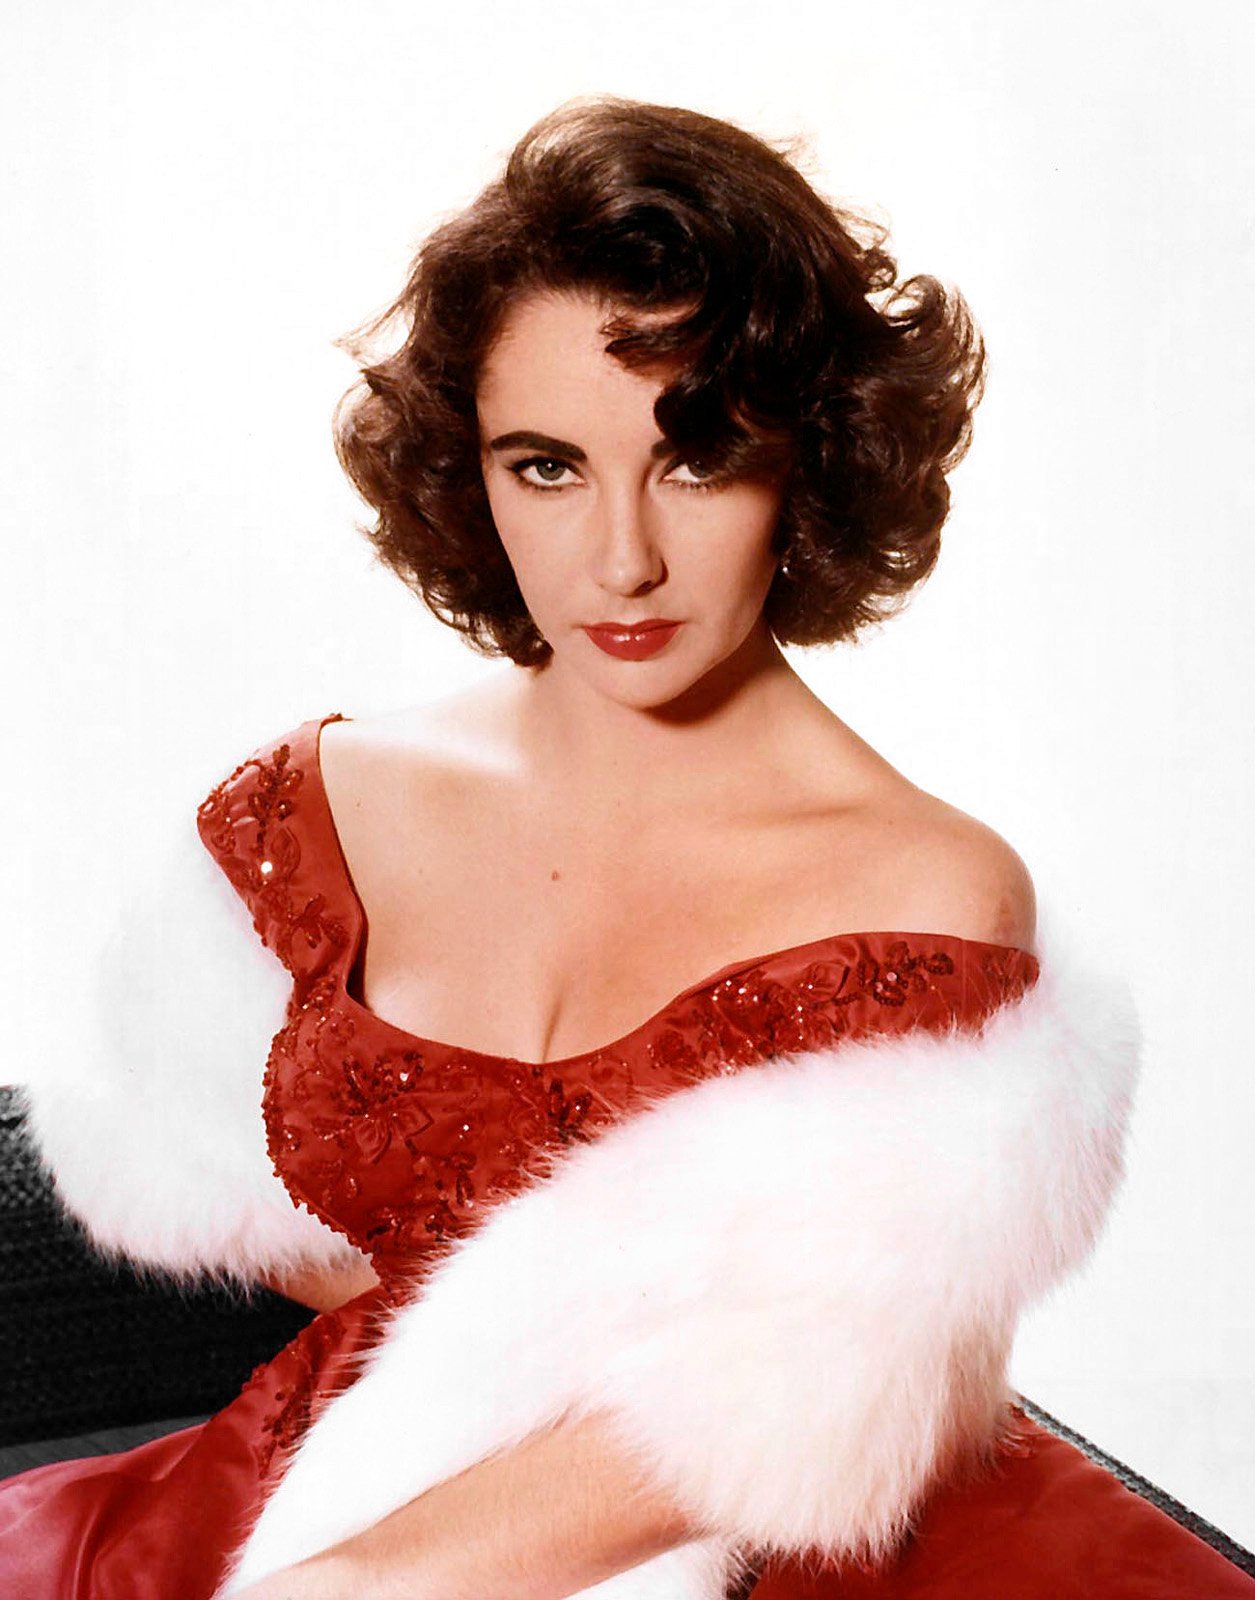 A publicity photo of Elizabeth Taylor circa 1955. | Source: Wikimedia Commons